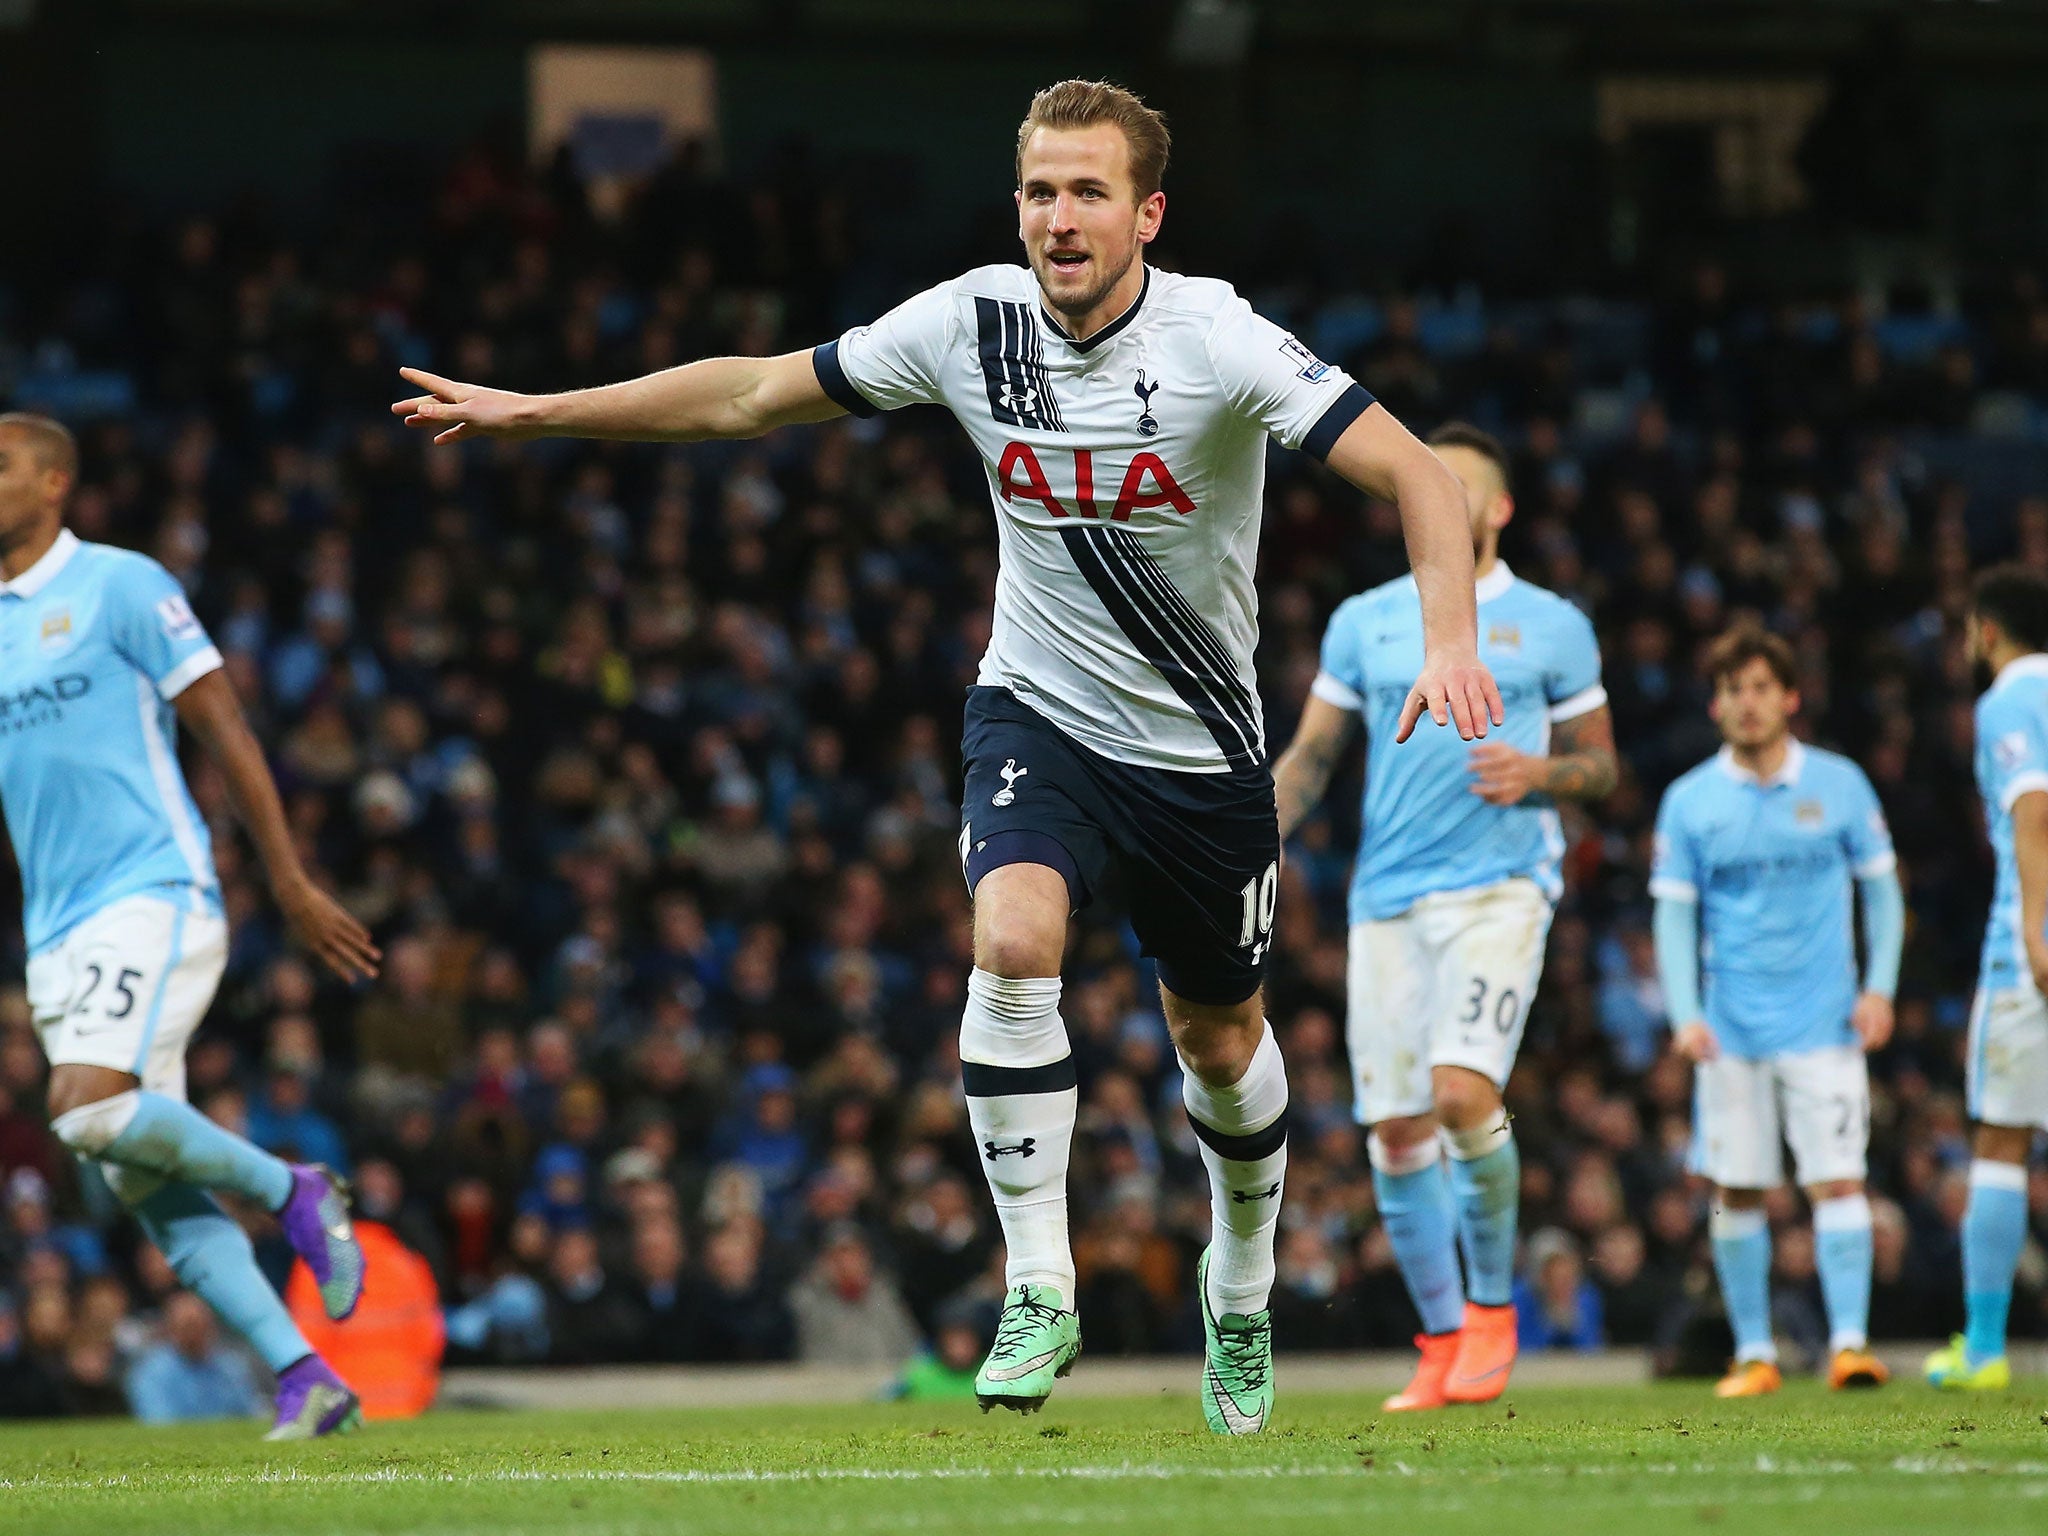 Harry Kane should be on the winning side this weekend according to Owen